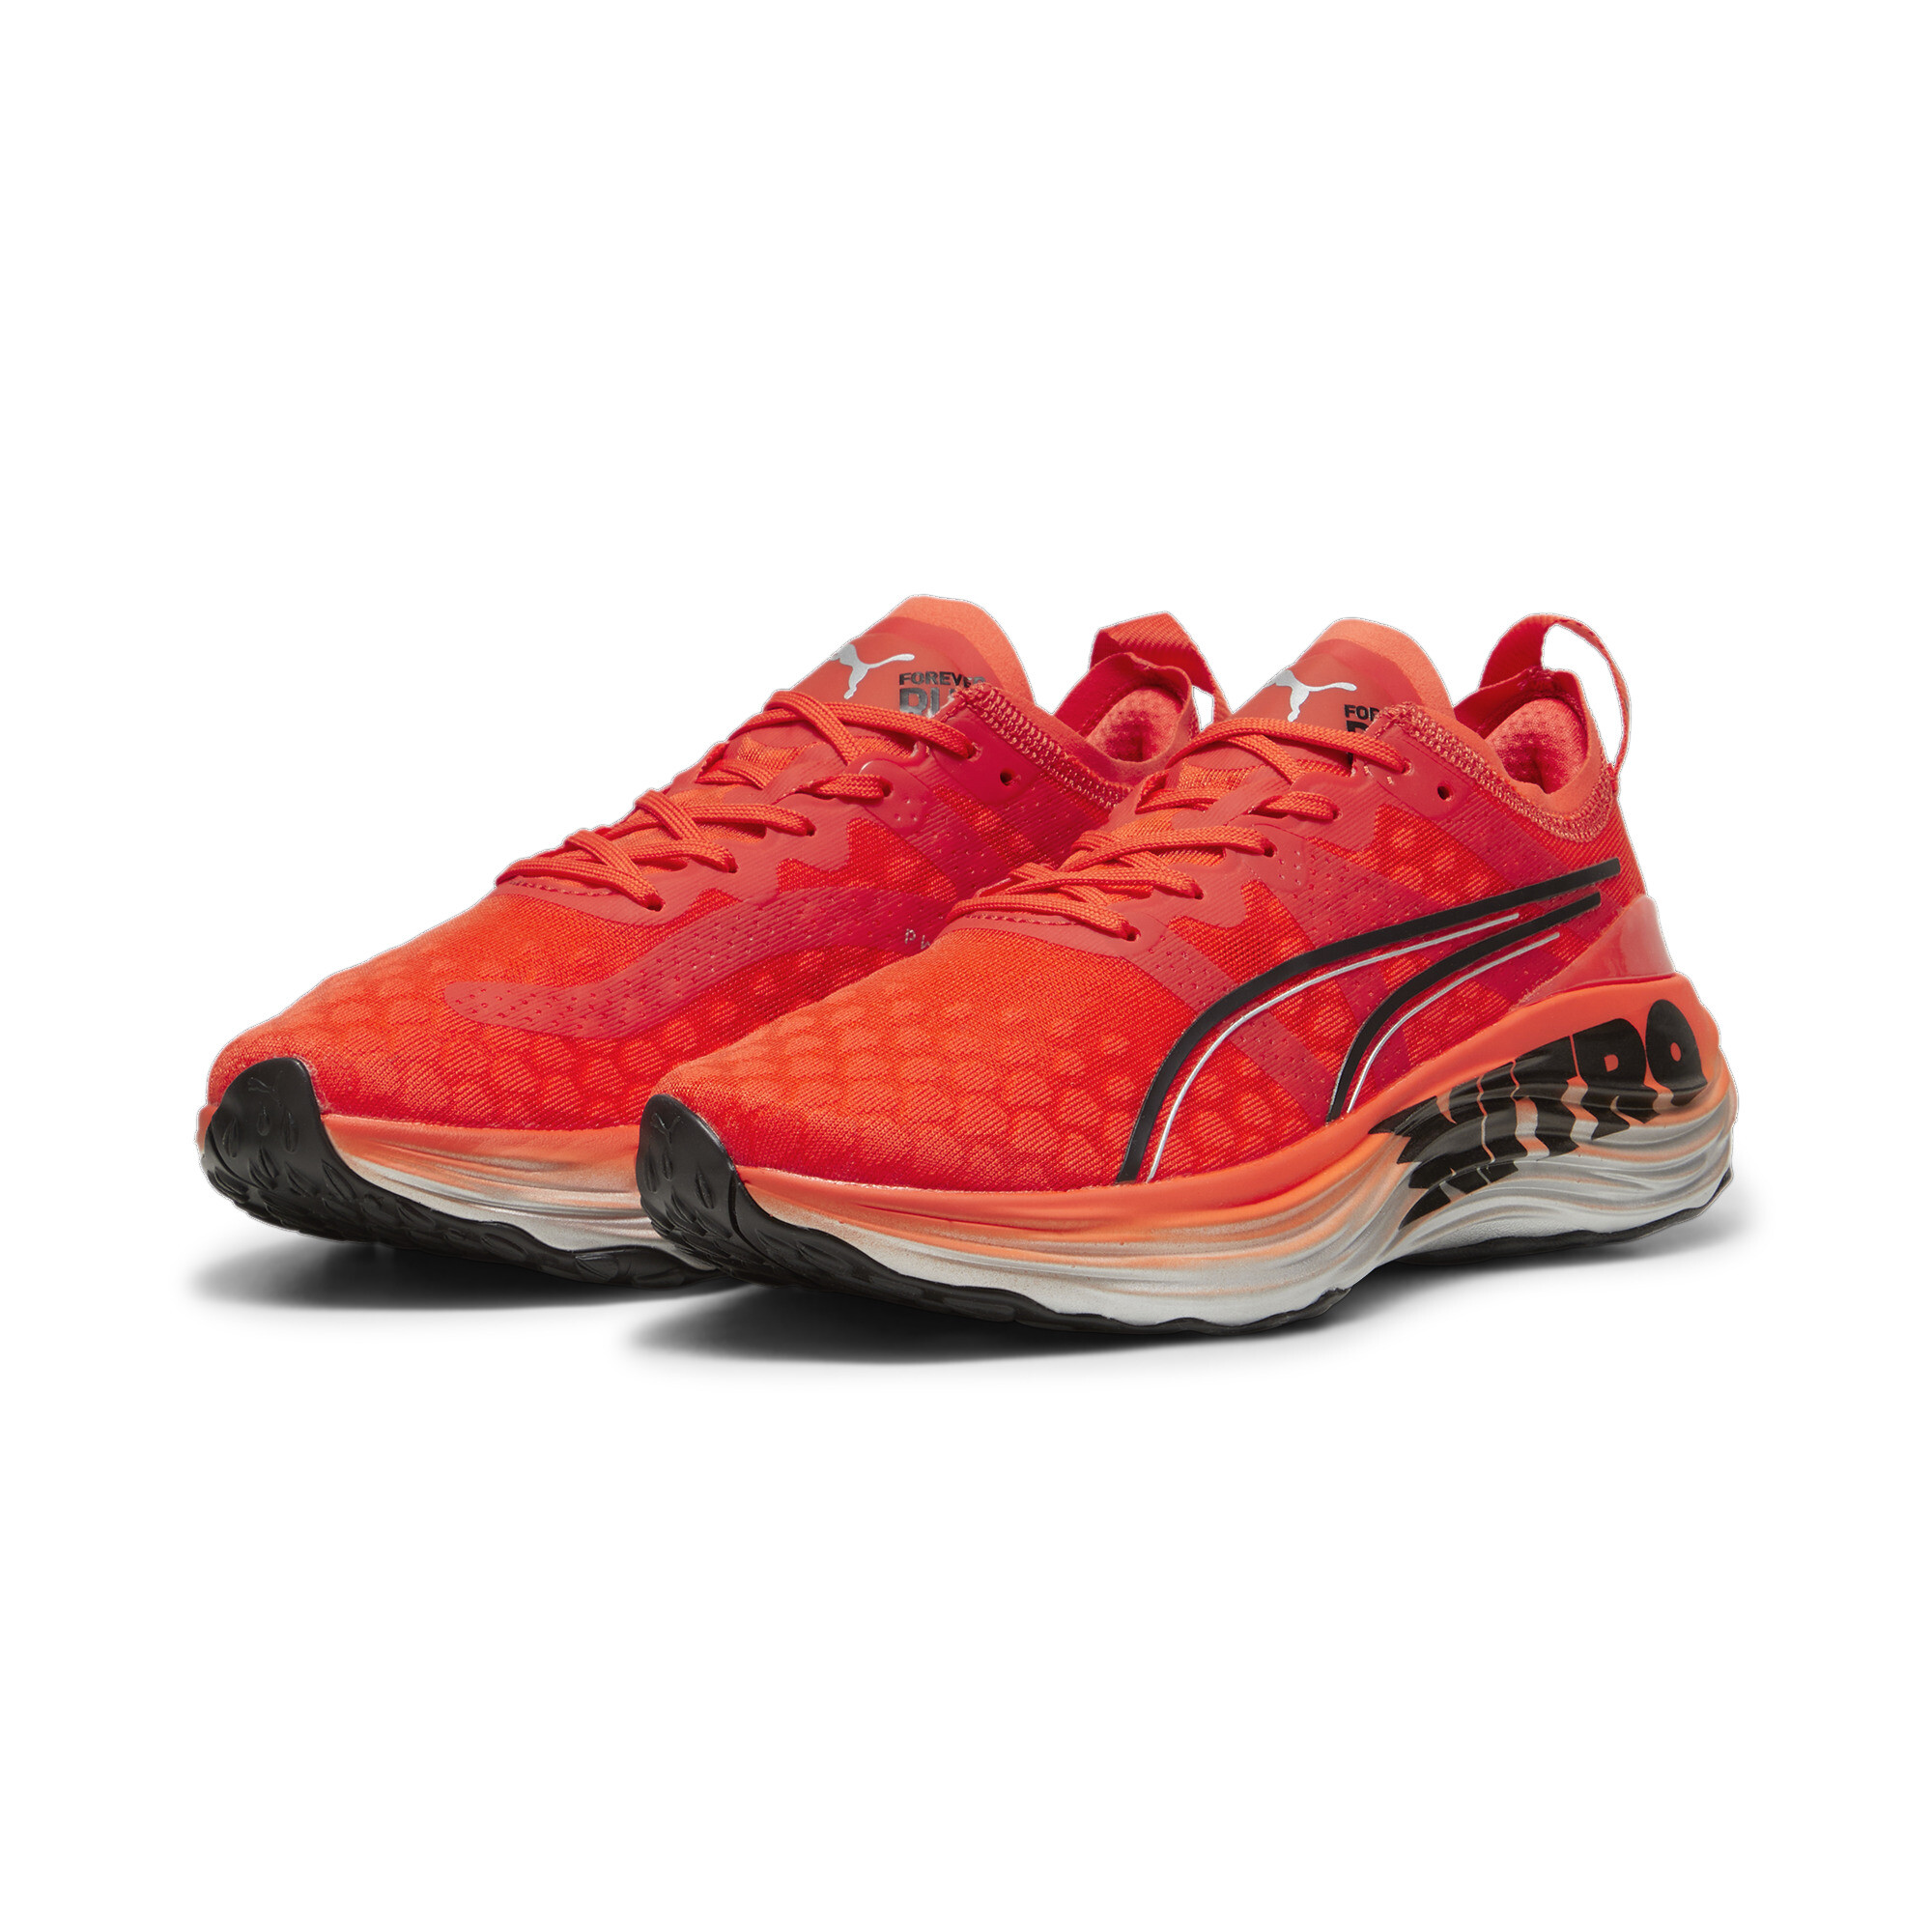 Women's Puma Forever Run NITRO's Running Shoes, Red, Size 35.5, Shoes